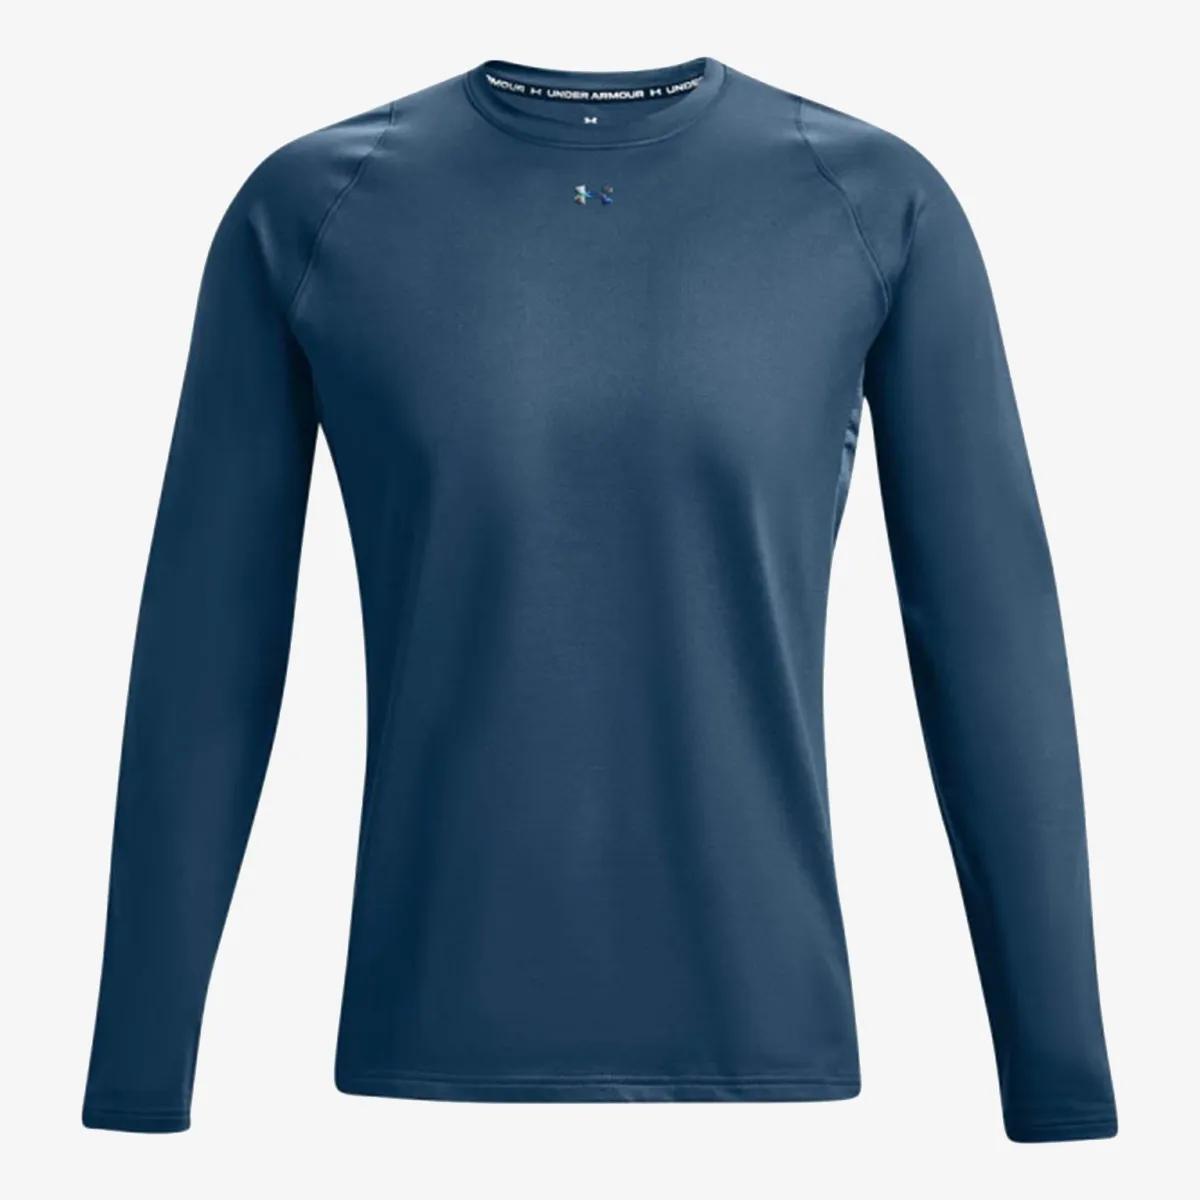 UNDER ARMOUR UA MERIDIAN COLD WEATHER LS 